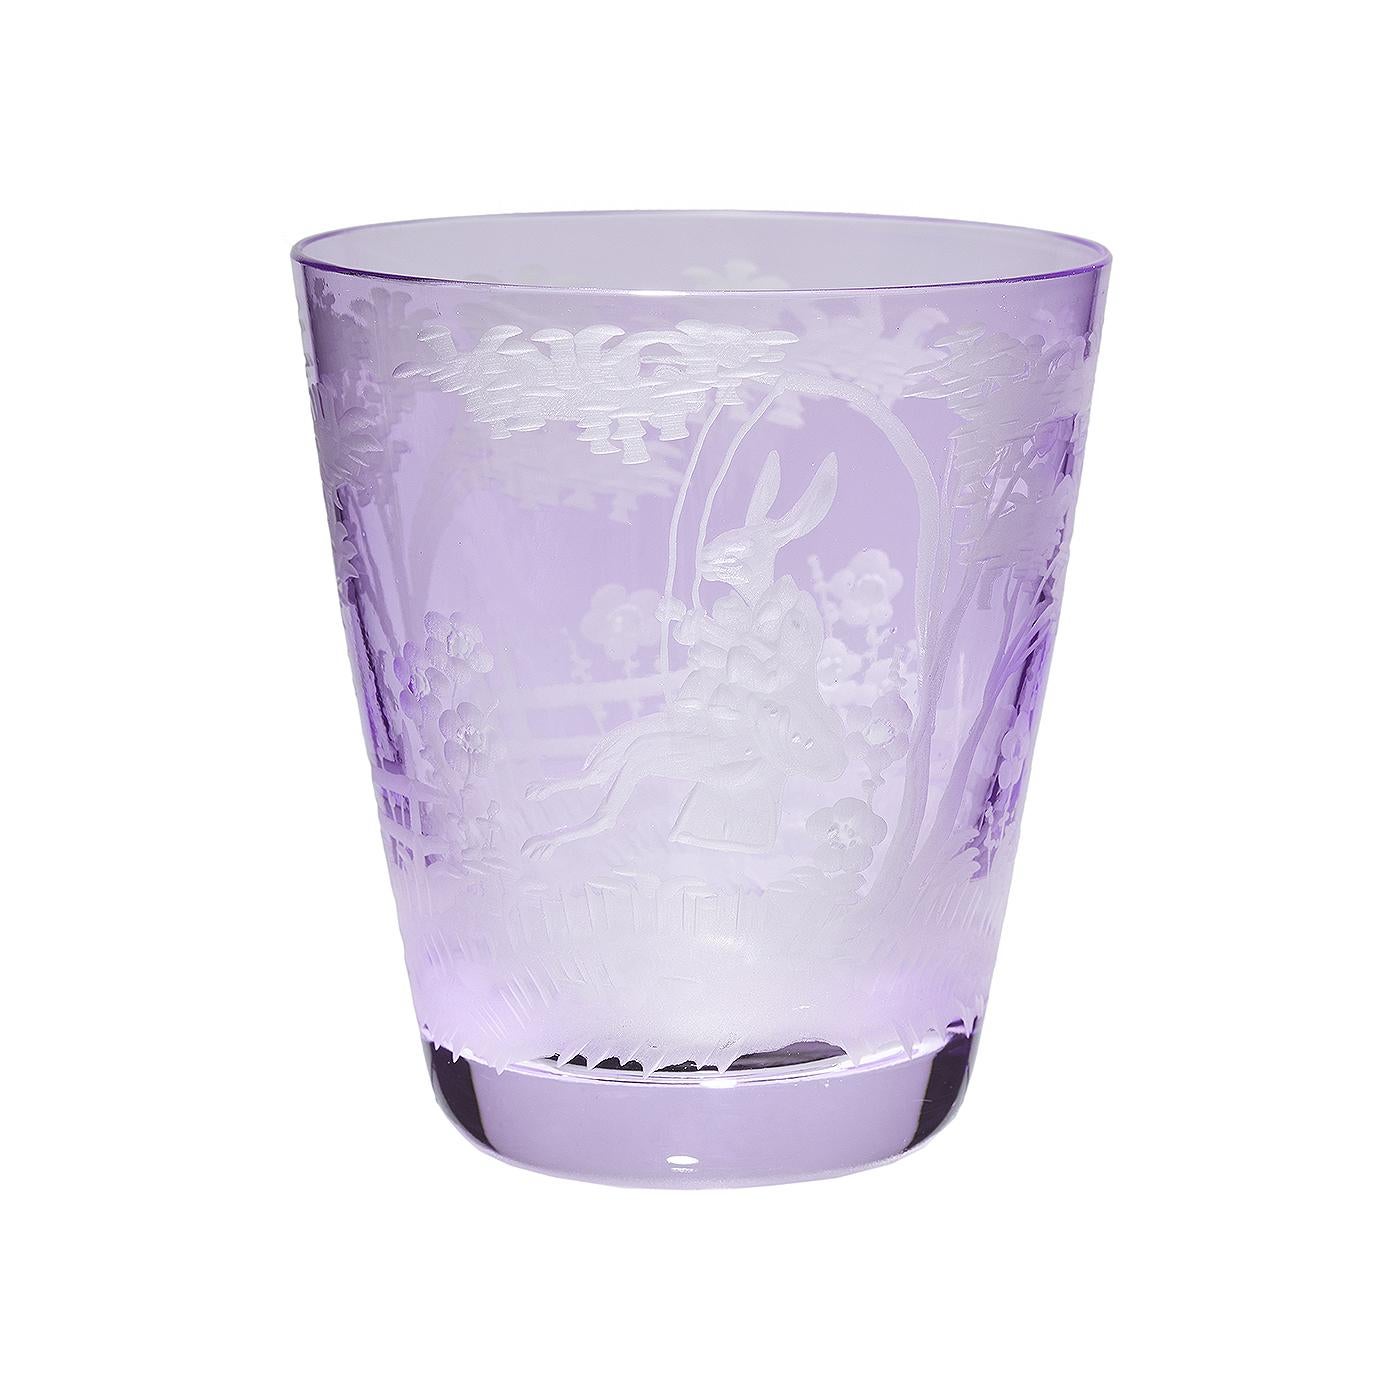 Set of six hand blown tumbler in purple crystal with a hand-edged Easter country style decor. The decor shows a hand-engraved vintage Easter decor all-over the glass. Handmade in Bavaria/Germany. Can be ordered in different colors. Colored crystal